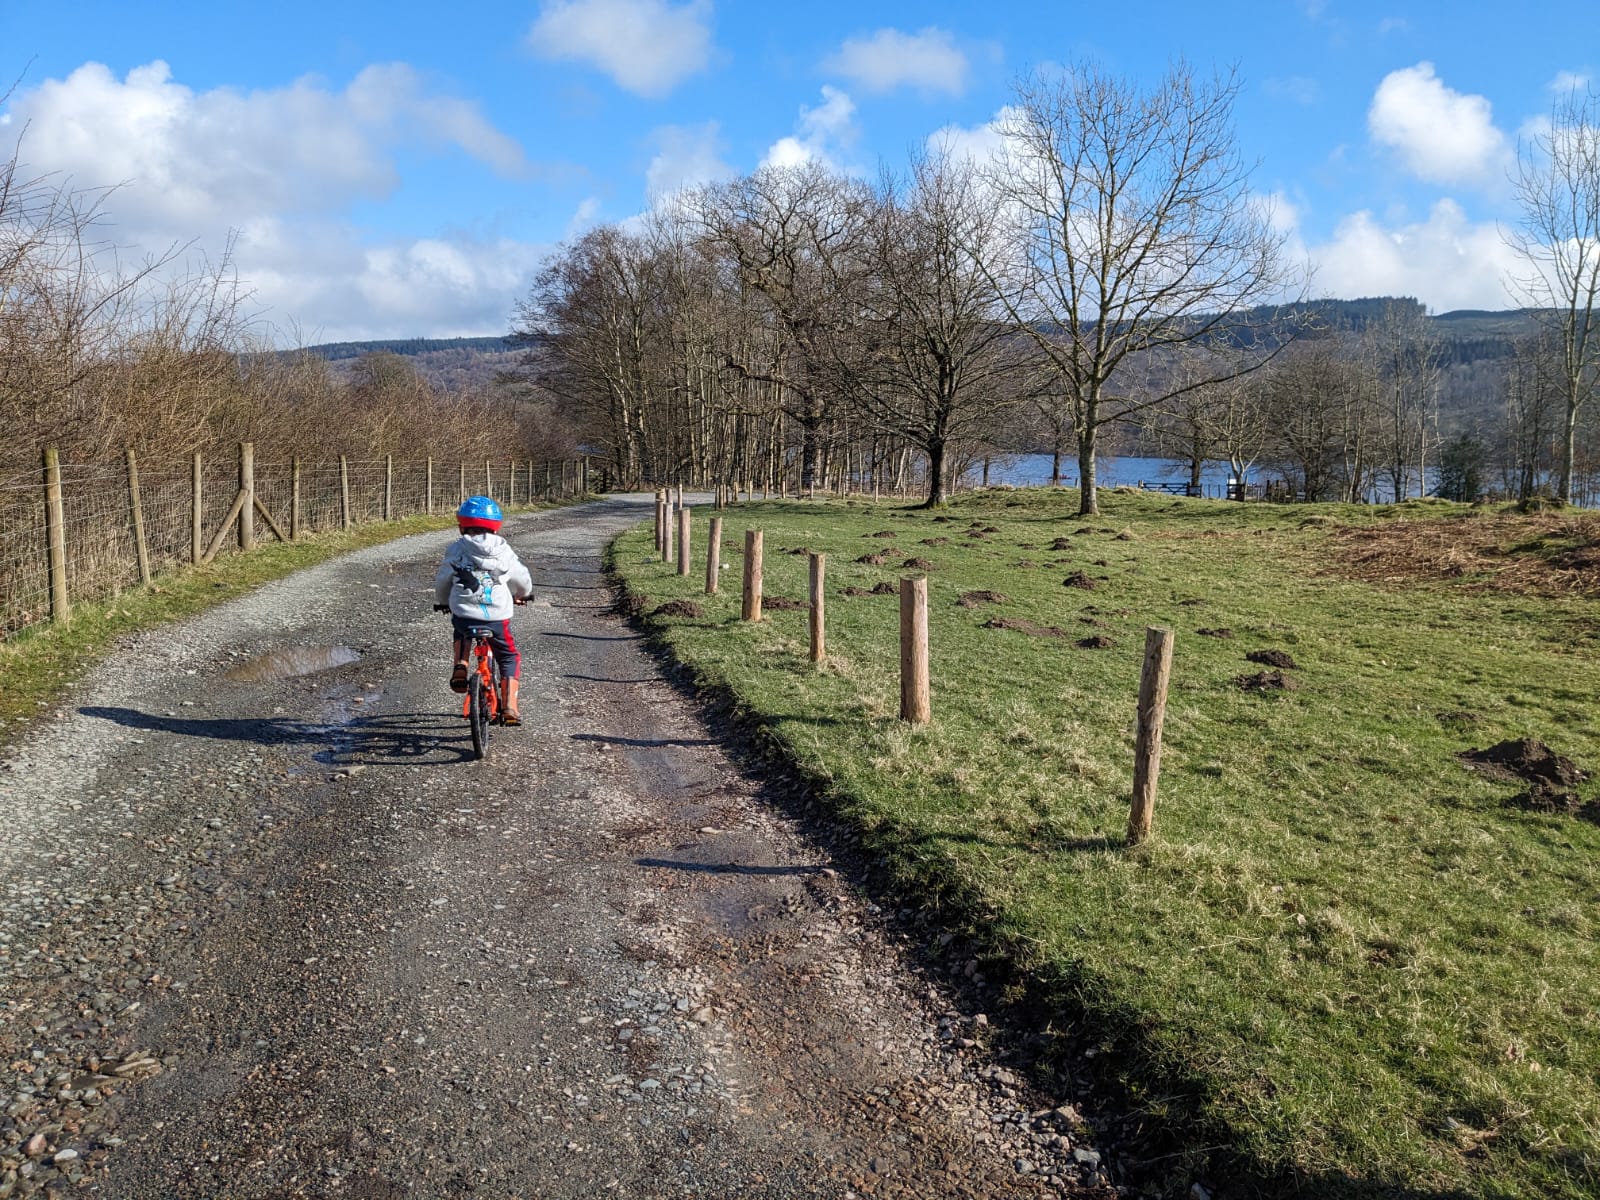 A boy seen from behind riding a 16 inch bike along a gravelly path